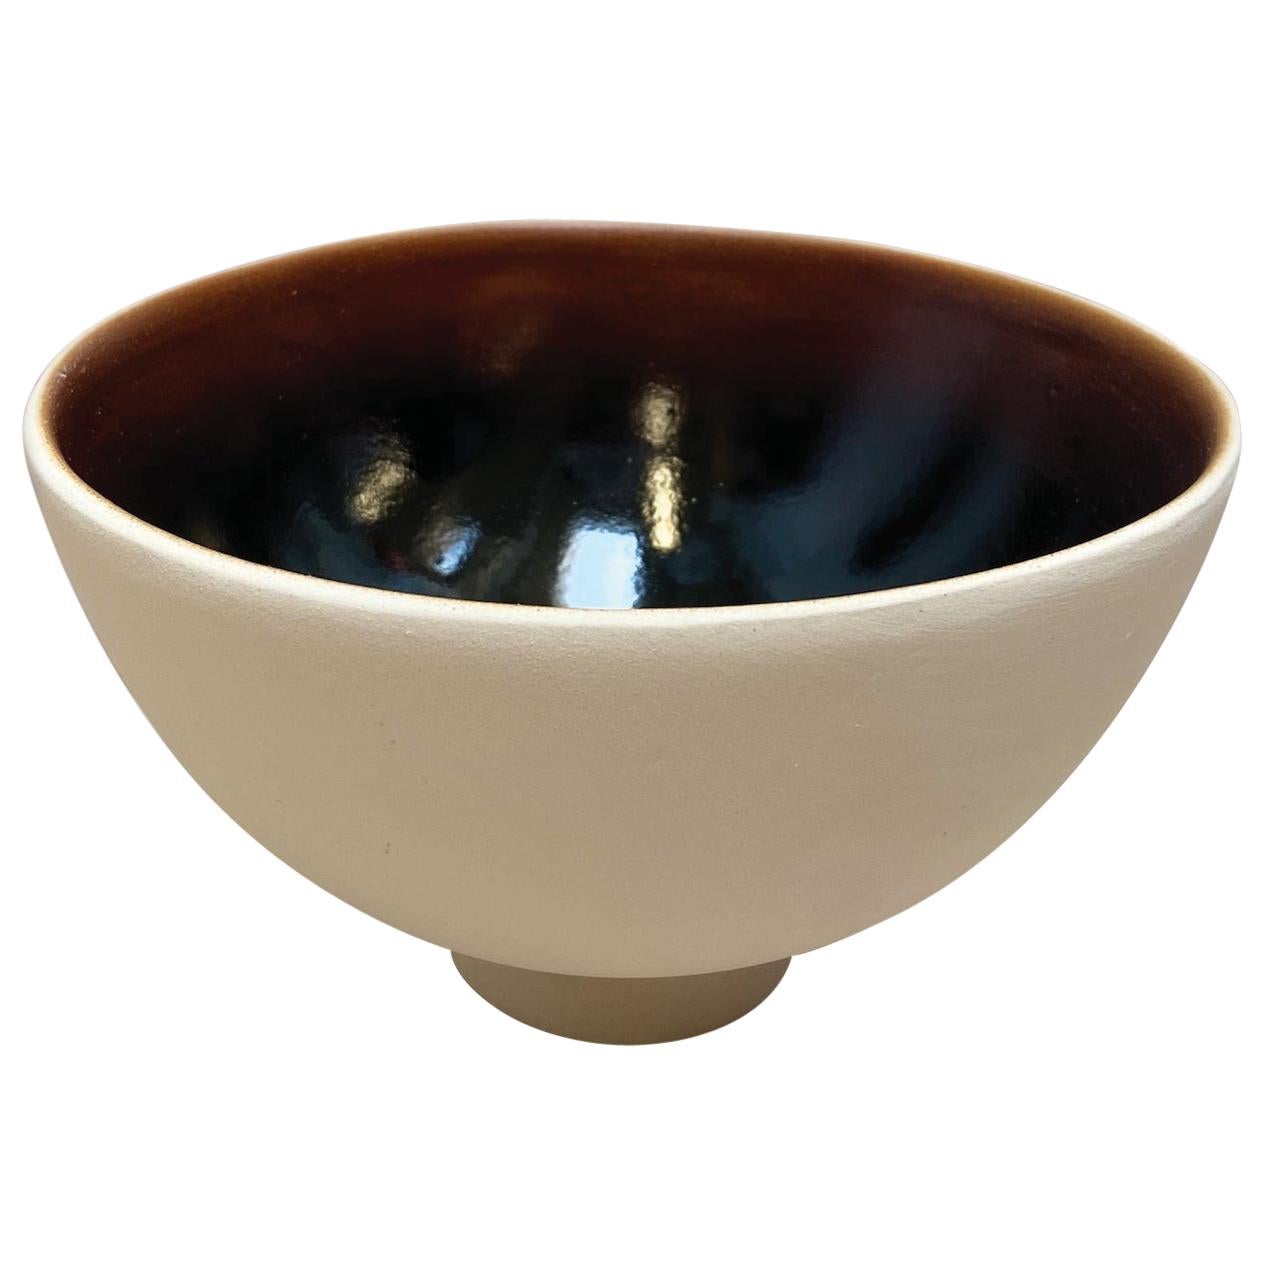 Ott Another Paradigmatic Handmade Ceramic Bowl by Studio Yoon Seok-Hyeon For Sale